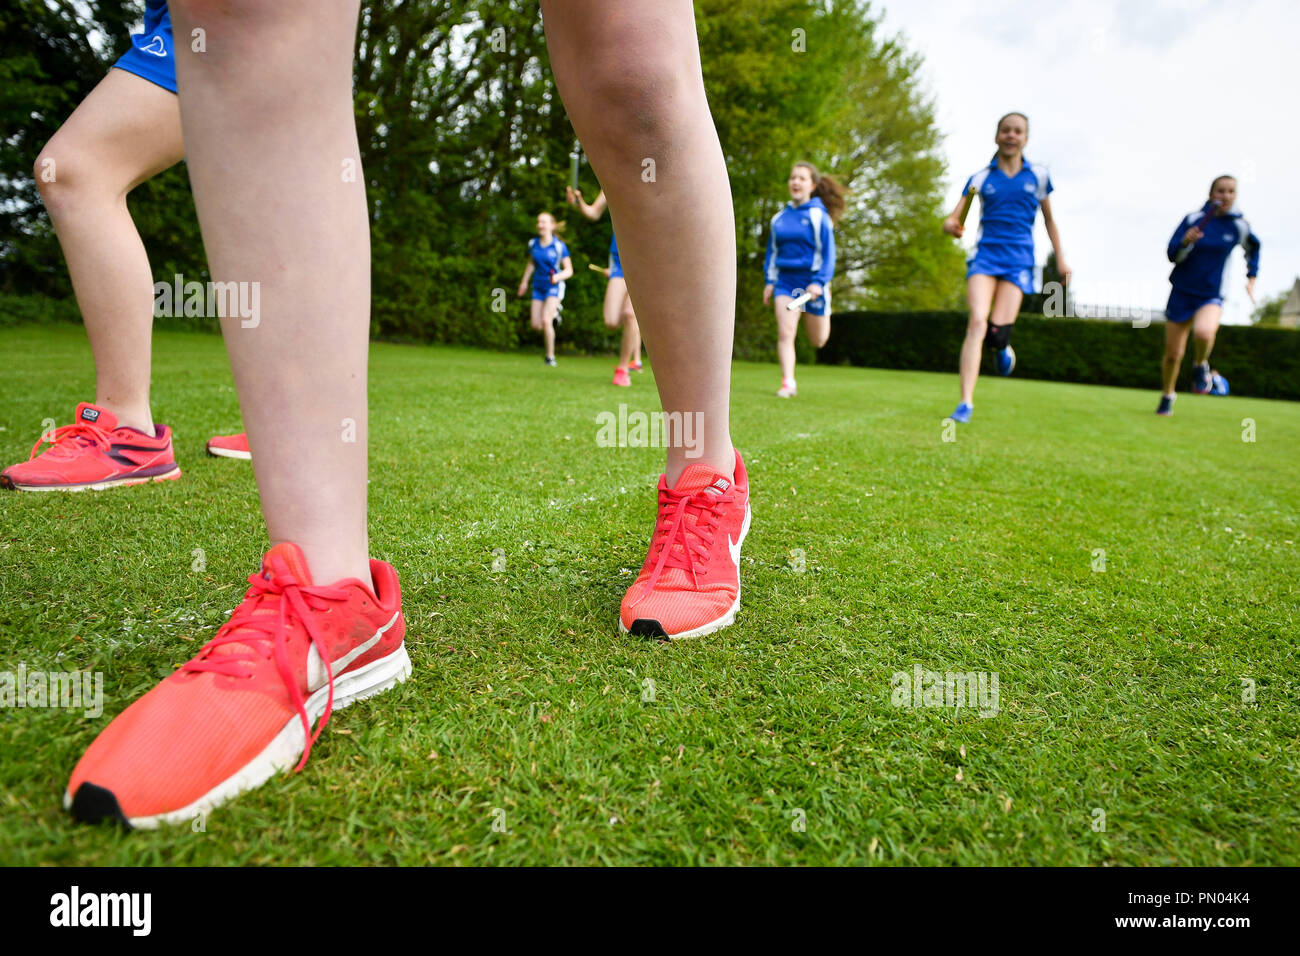 Students run during a Physical Education (PE) lesson on the school playing field at Royal High School Bath, which is a day and boarding school for girls aged 3-18 and also part of The Girls' Day School Trust, the leading network of independent girls' schools in the UK. Stock Photo